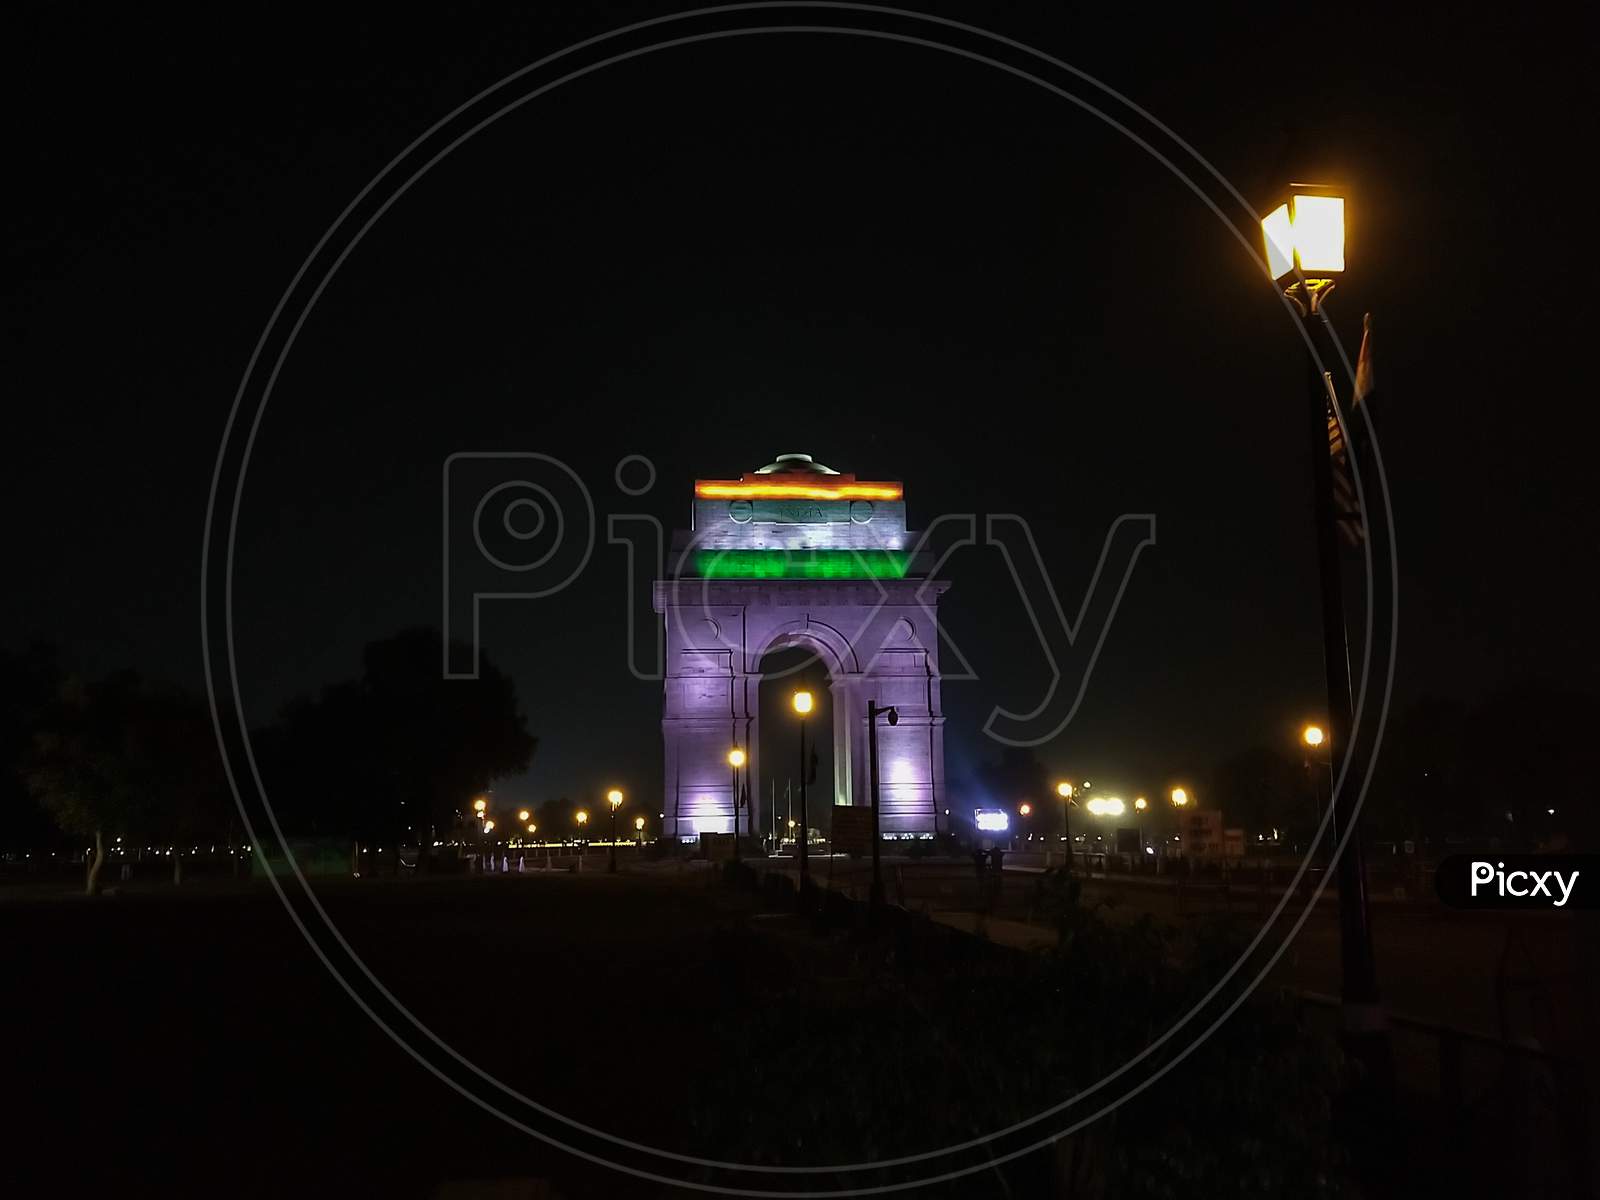 India Gate, Delhi, India- February 25, 2020: Night View Of India Gate From Outside Of Boundary. Indian National Flag Projected On India Gate